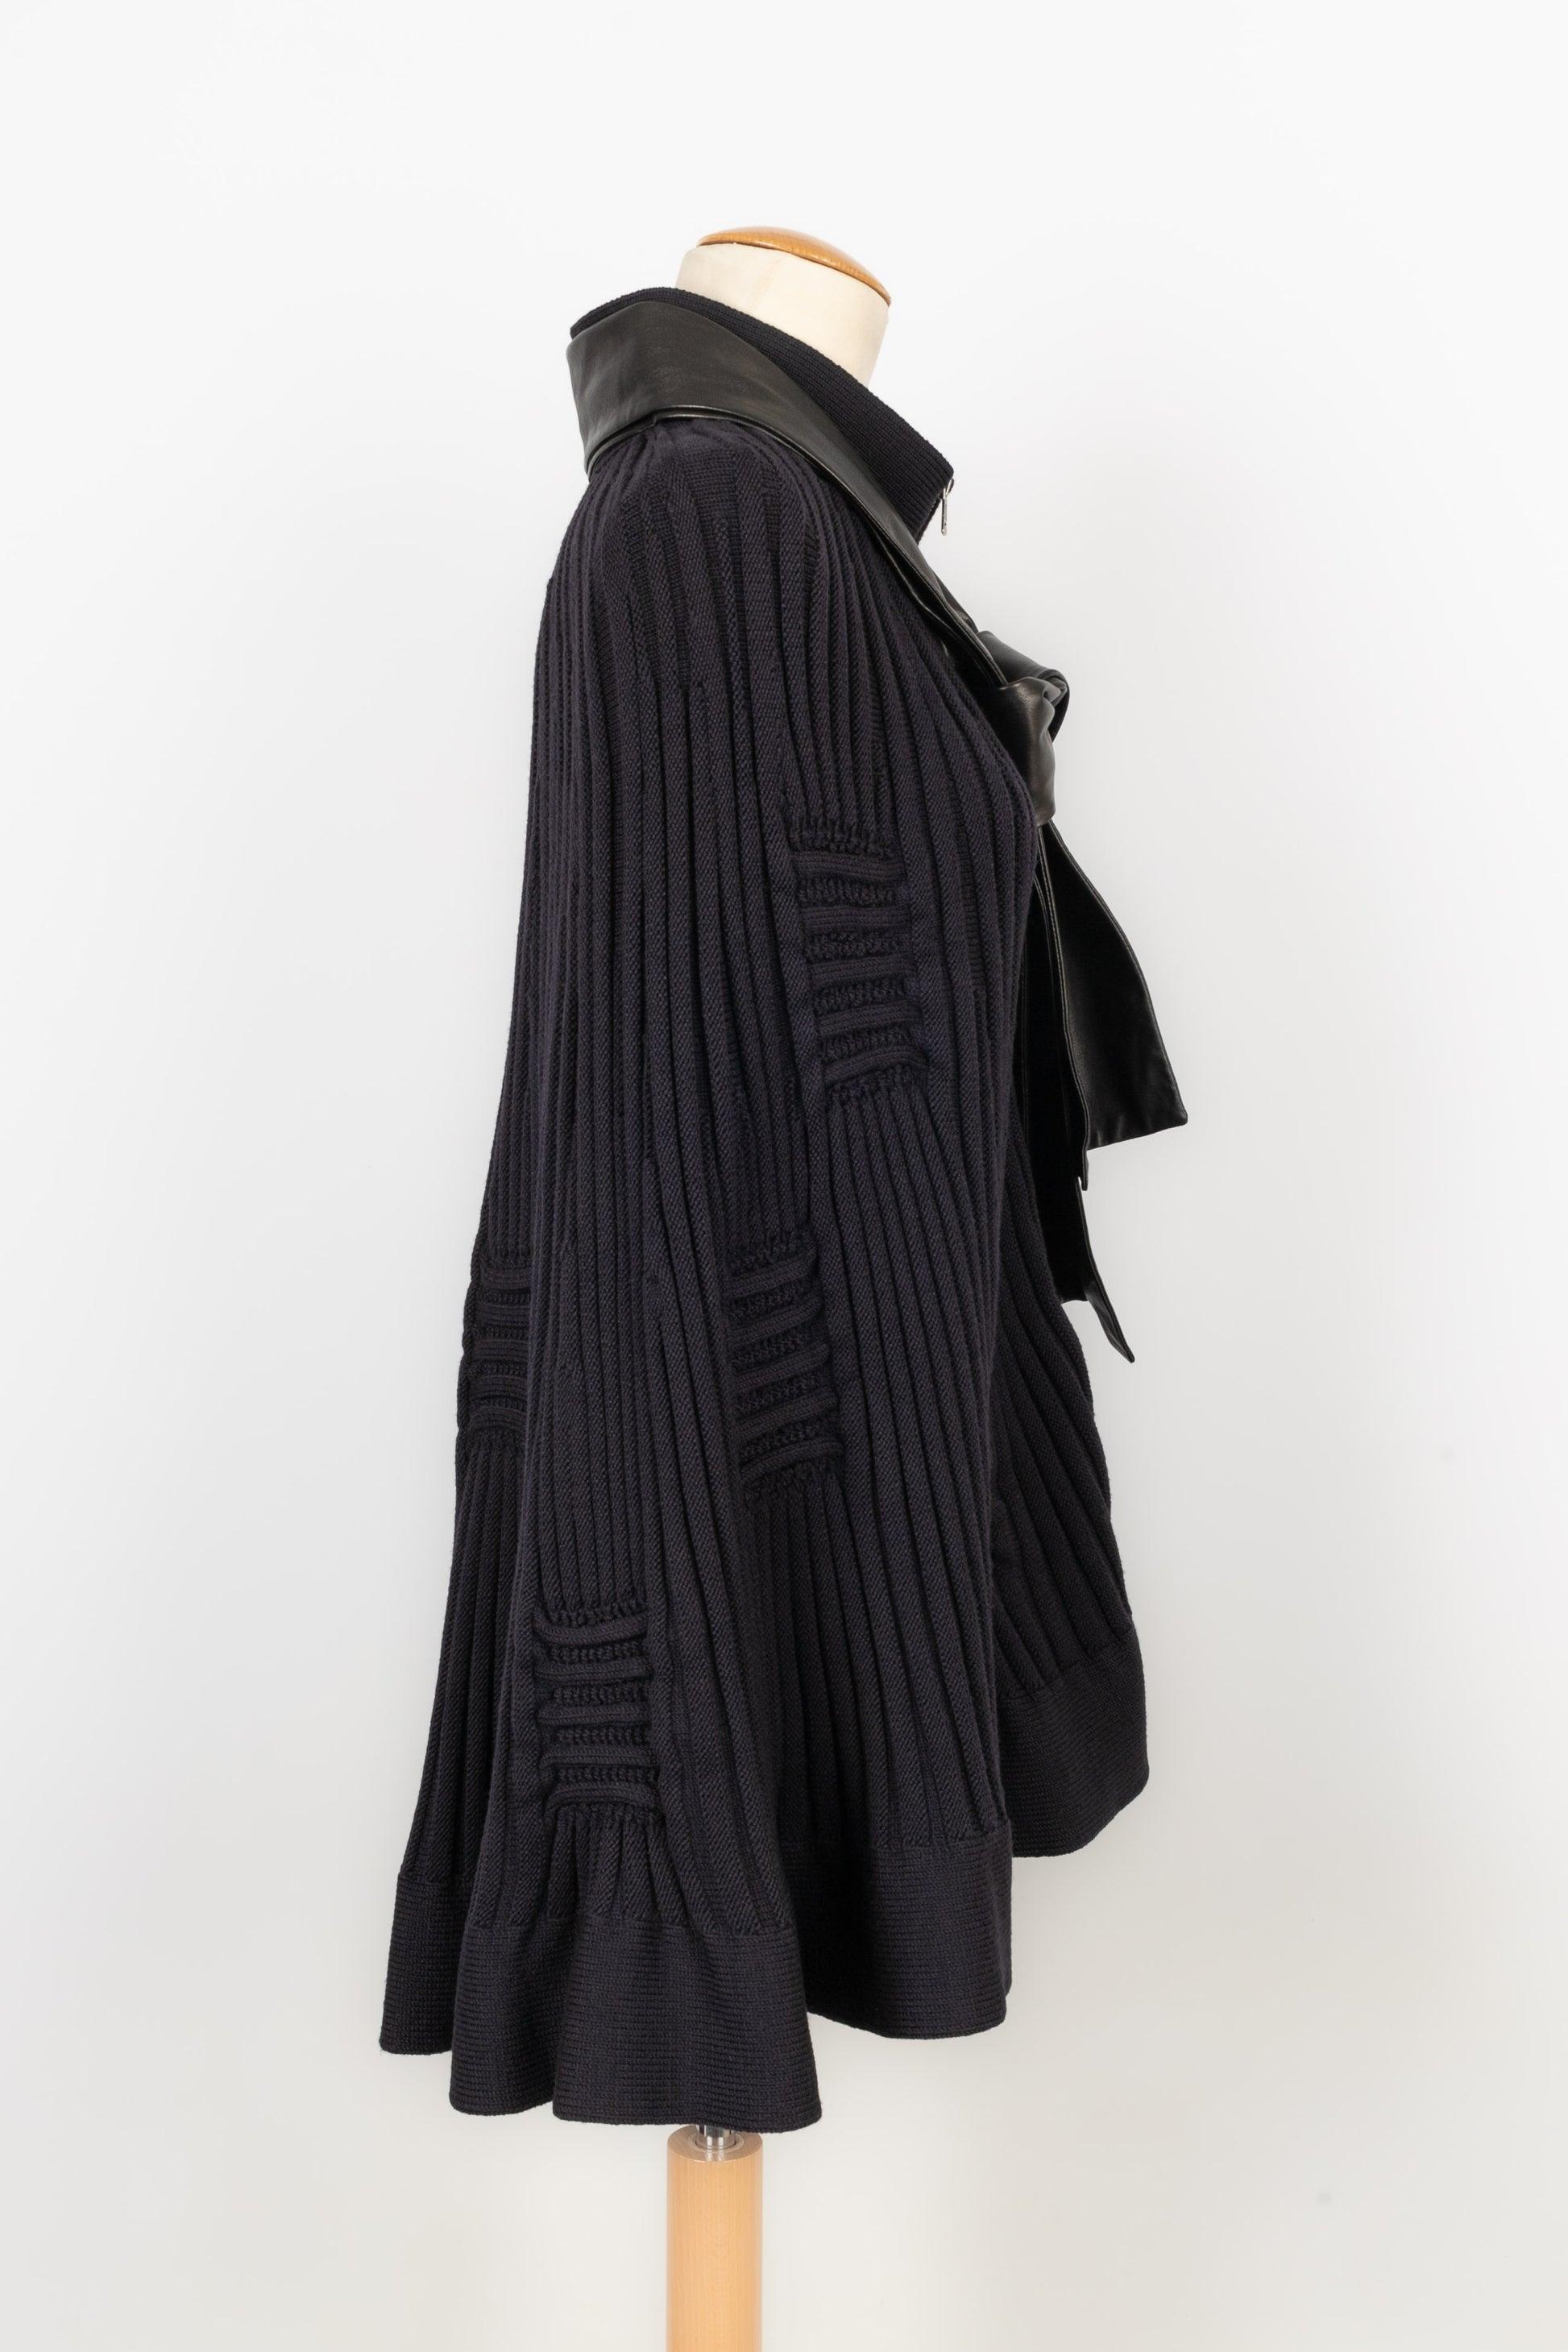 Valentino Wool Cape with Black Leather Ascot Tie For Sale 2